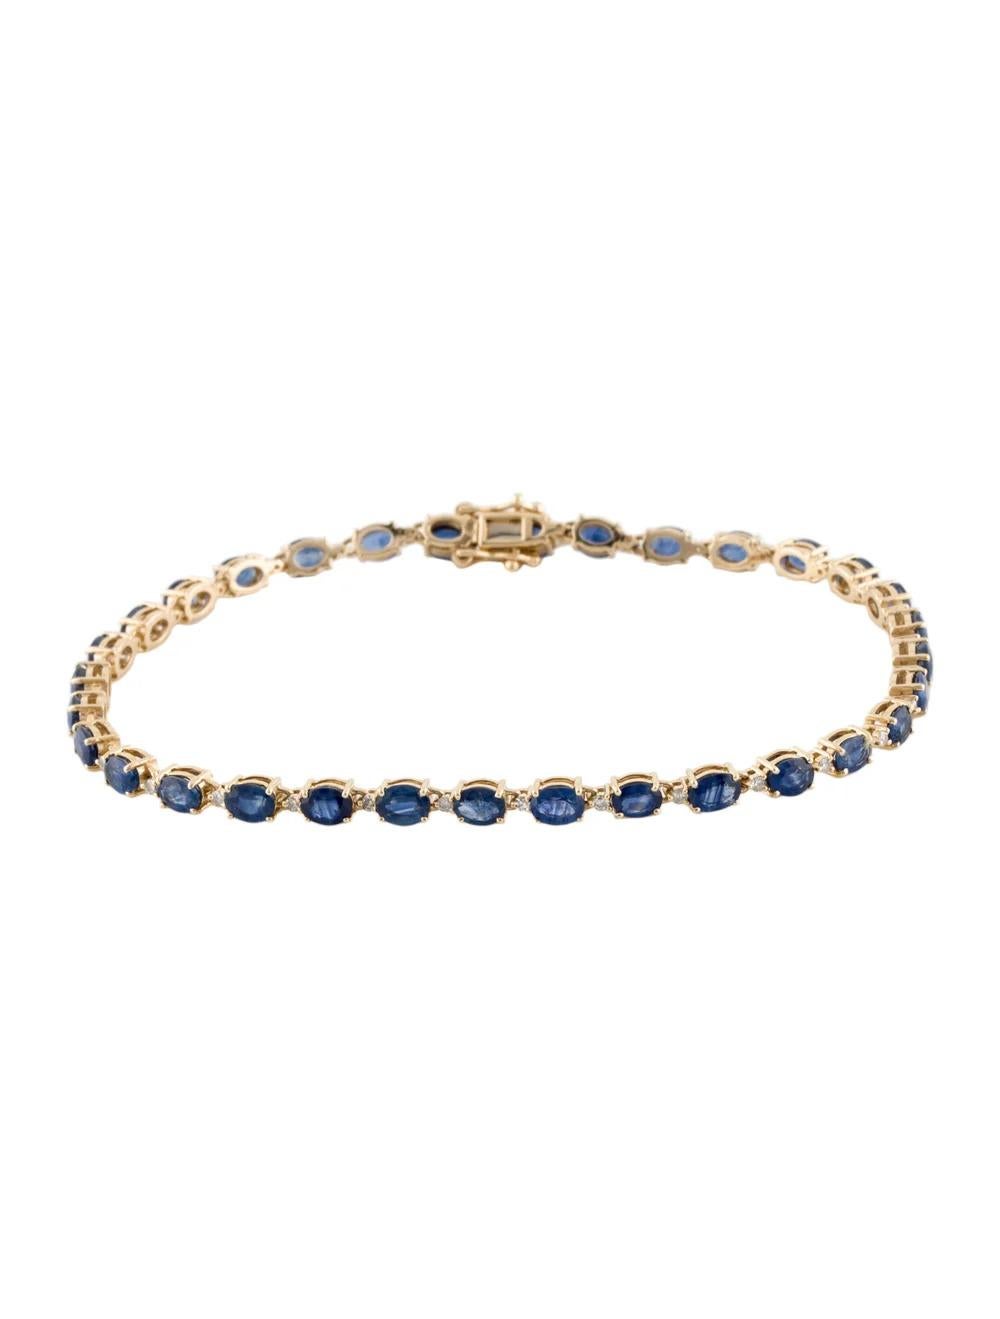 Elevate your style with this exquisite 14K Yellow Gold Bracelet, featuring a stunning 5.76 Carat Oval Modified Brilliant Sapphire, adorned with sparkling diamonds.

Specifications:

* Metal Type: 14K Yellow Gold
* Gemstone:
* Sapphire
* Carat